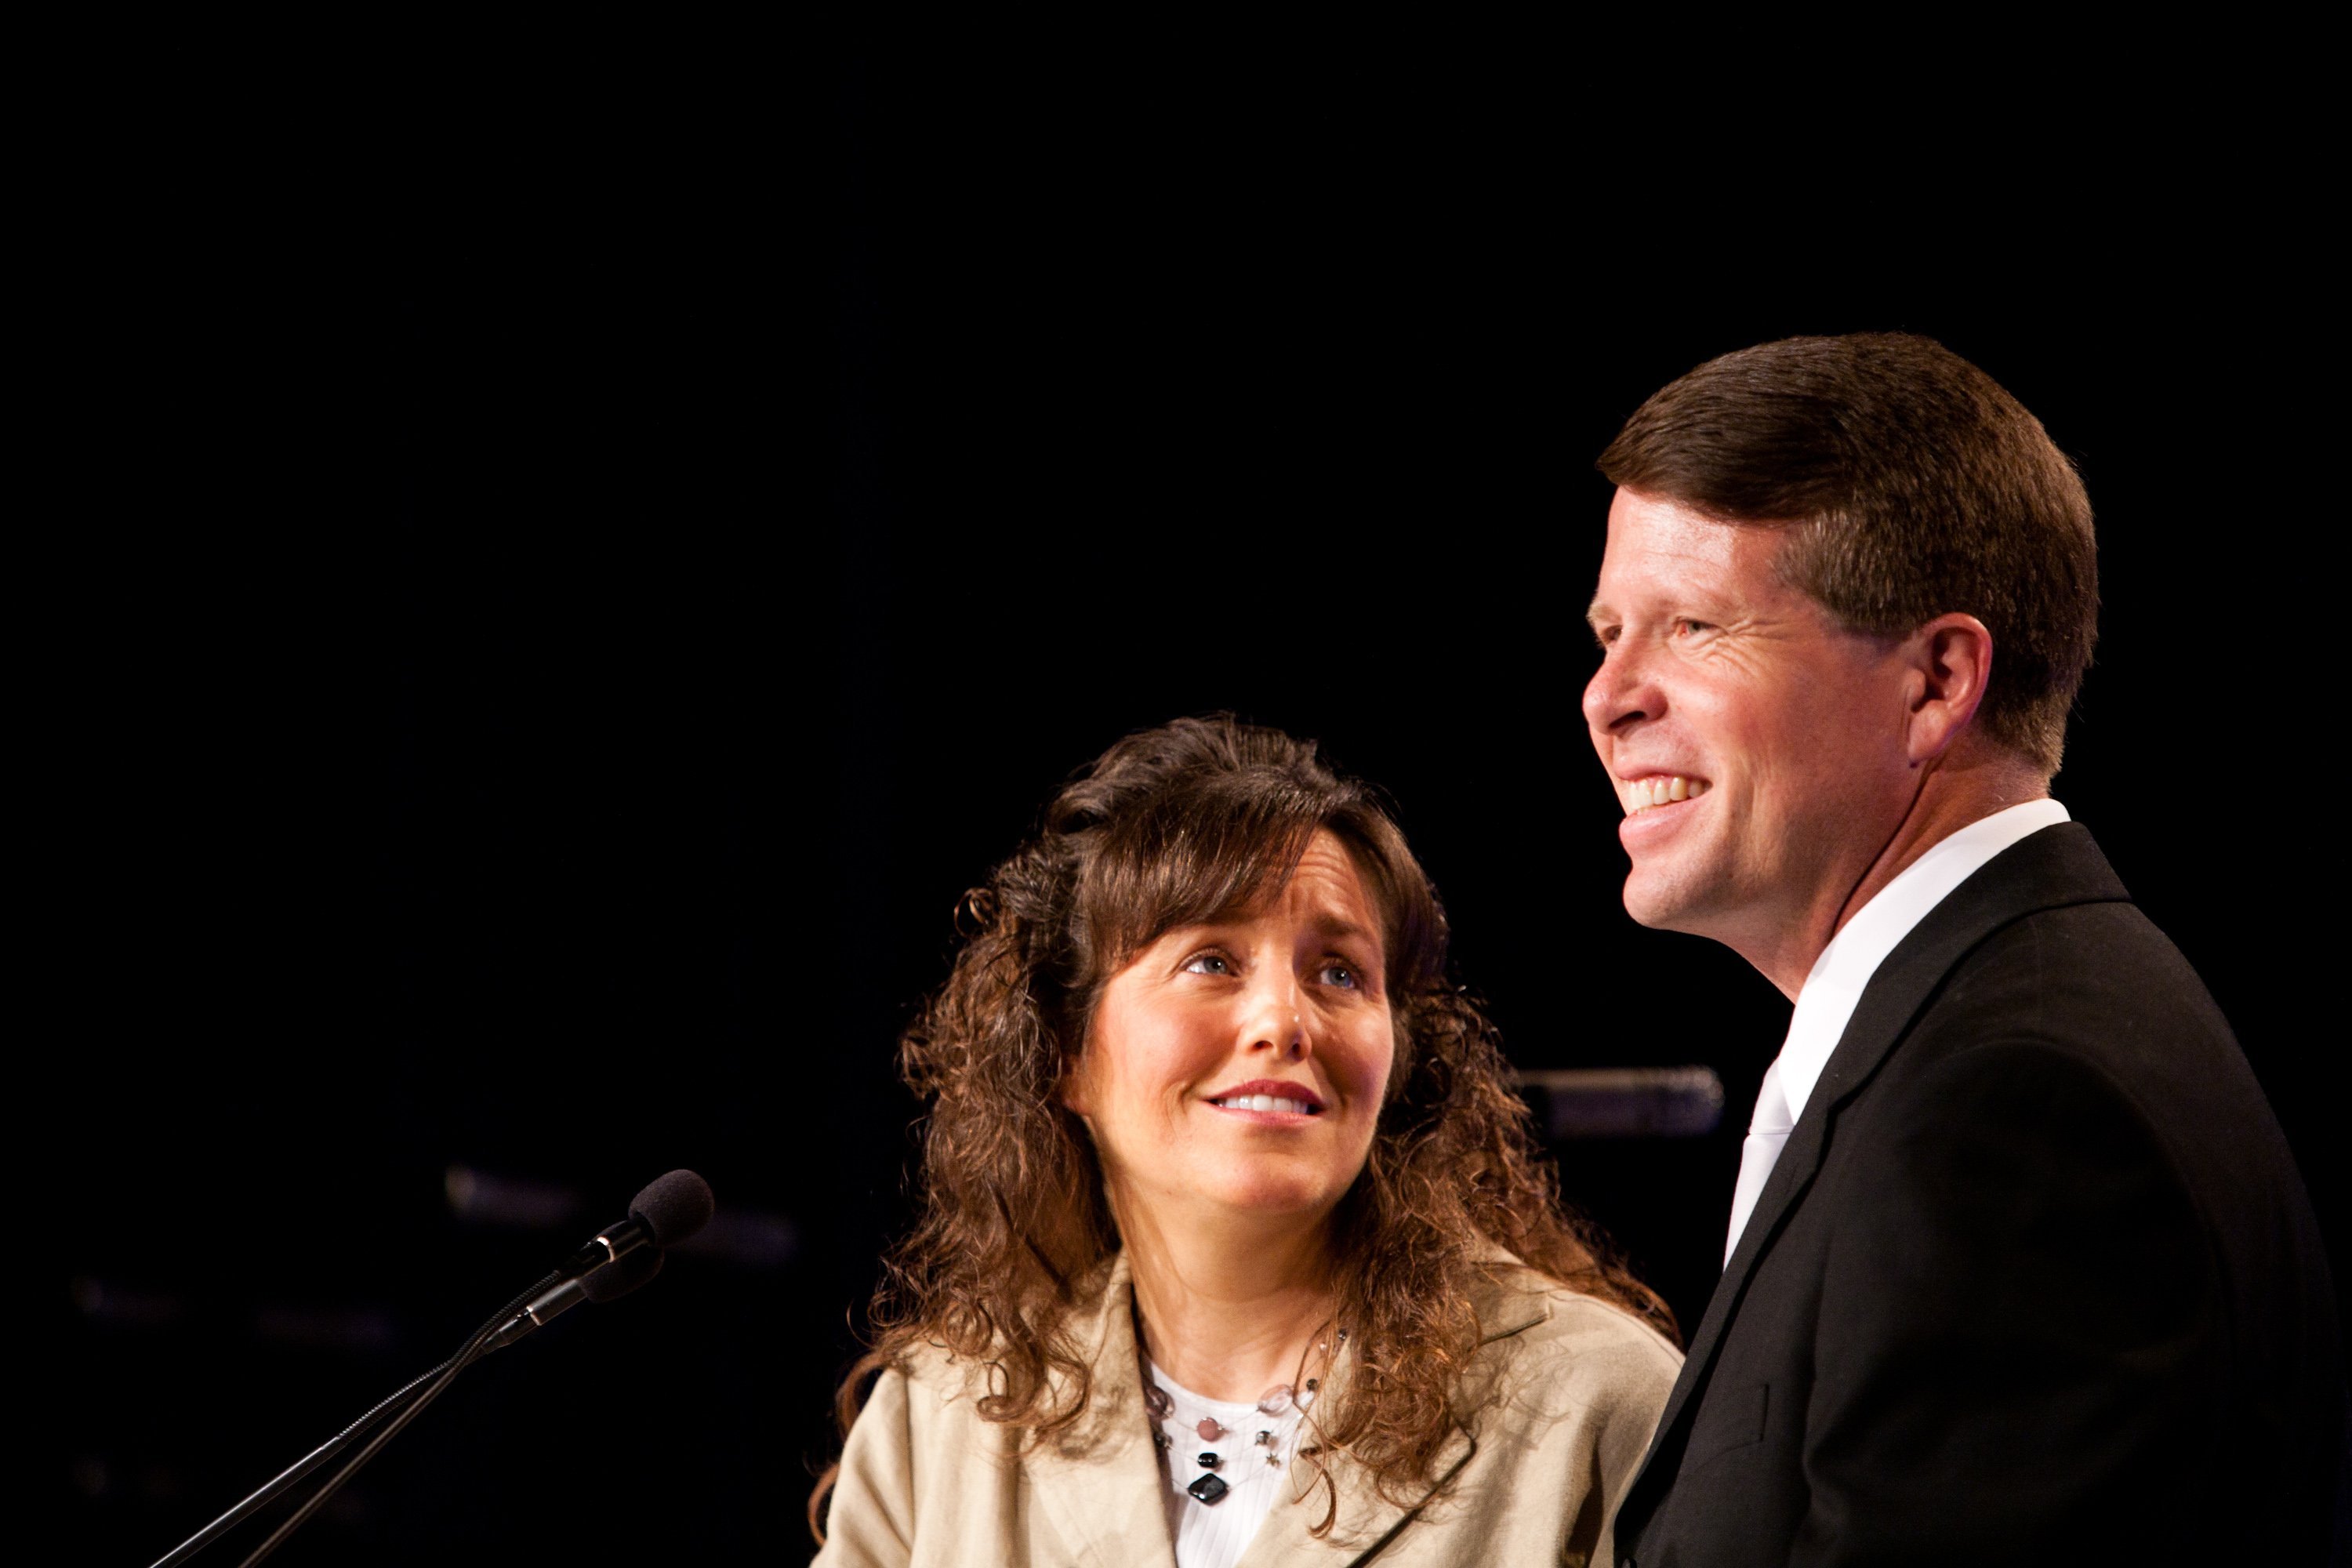 Michelle Duggar and Jim Bob Duggar at the Values Voter Summit on September 17, 2010 in Washington, DC. | Photo: GettyImages